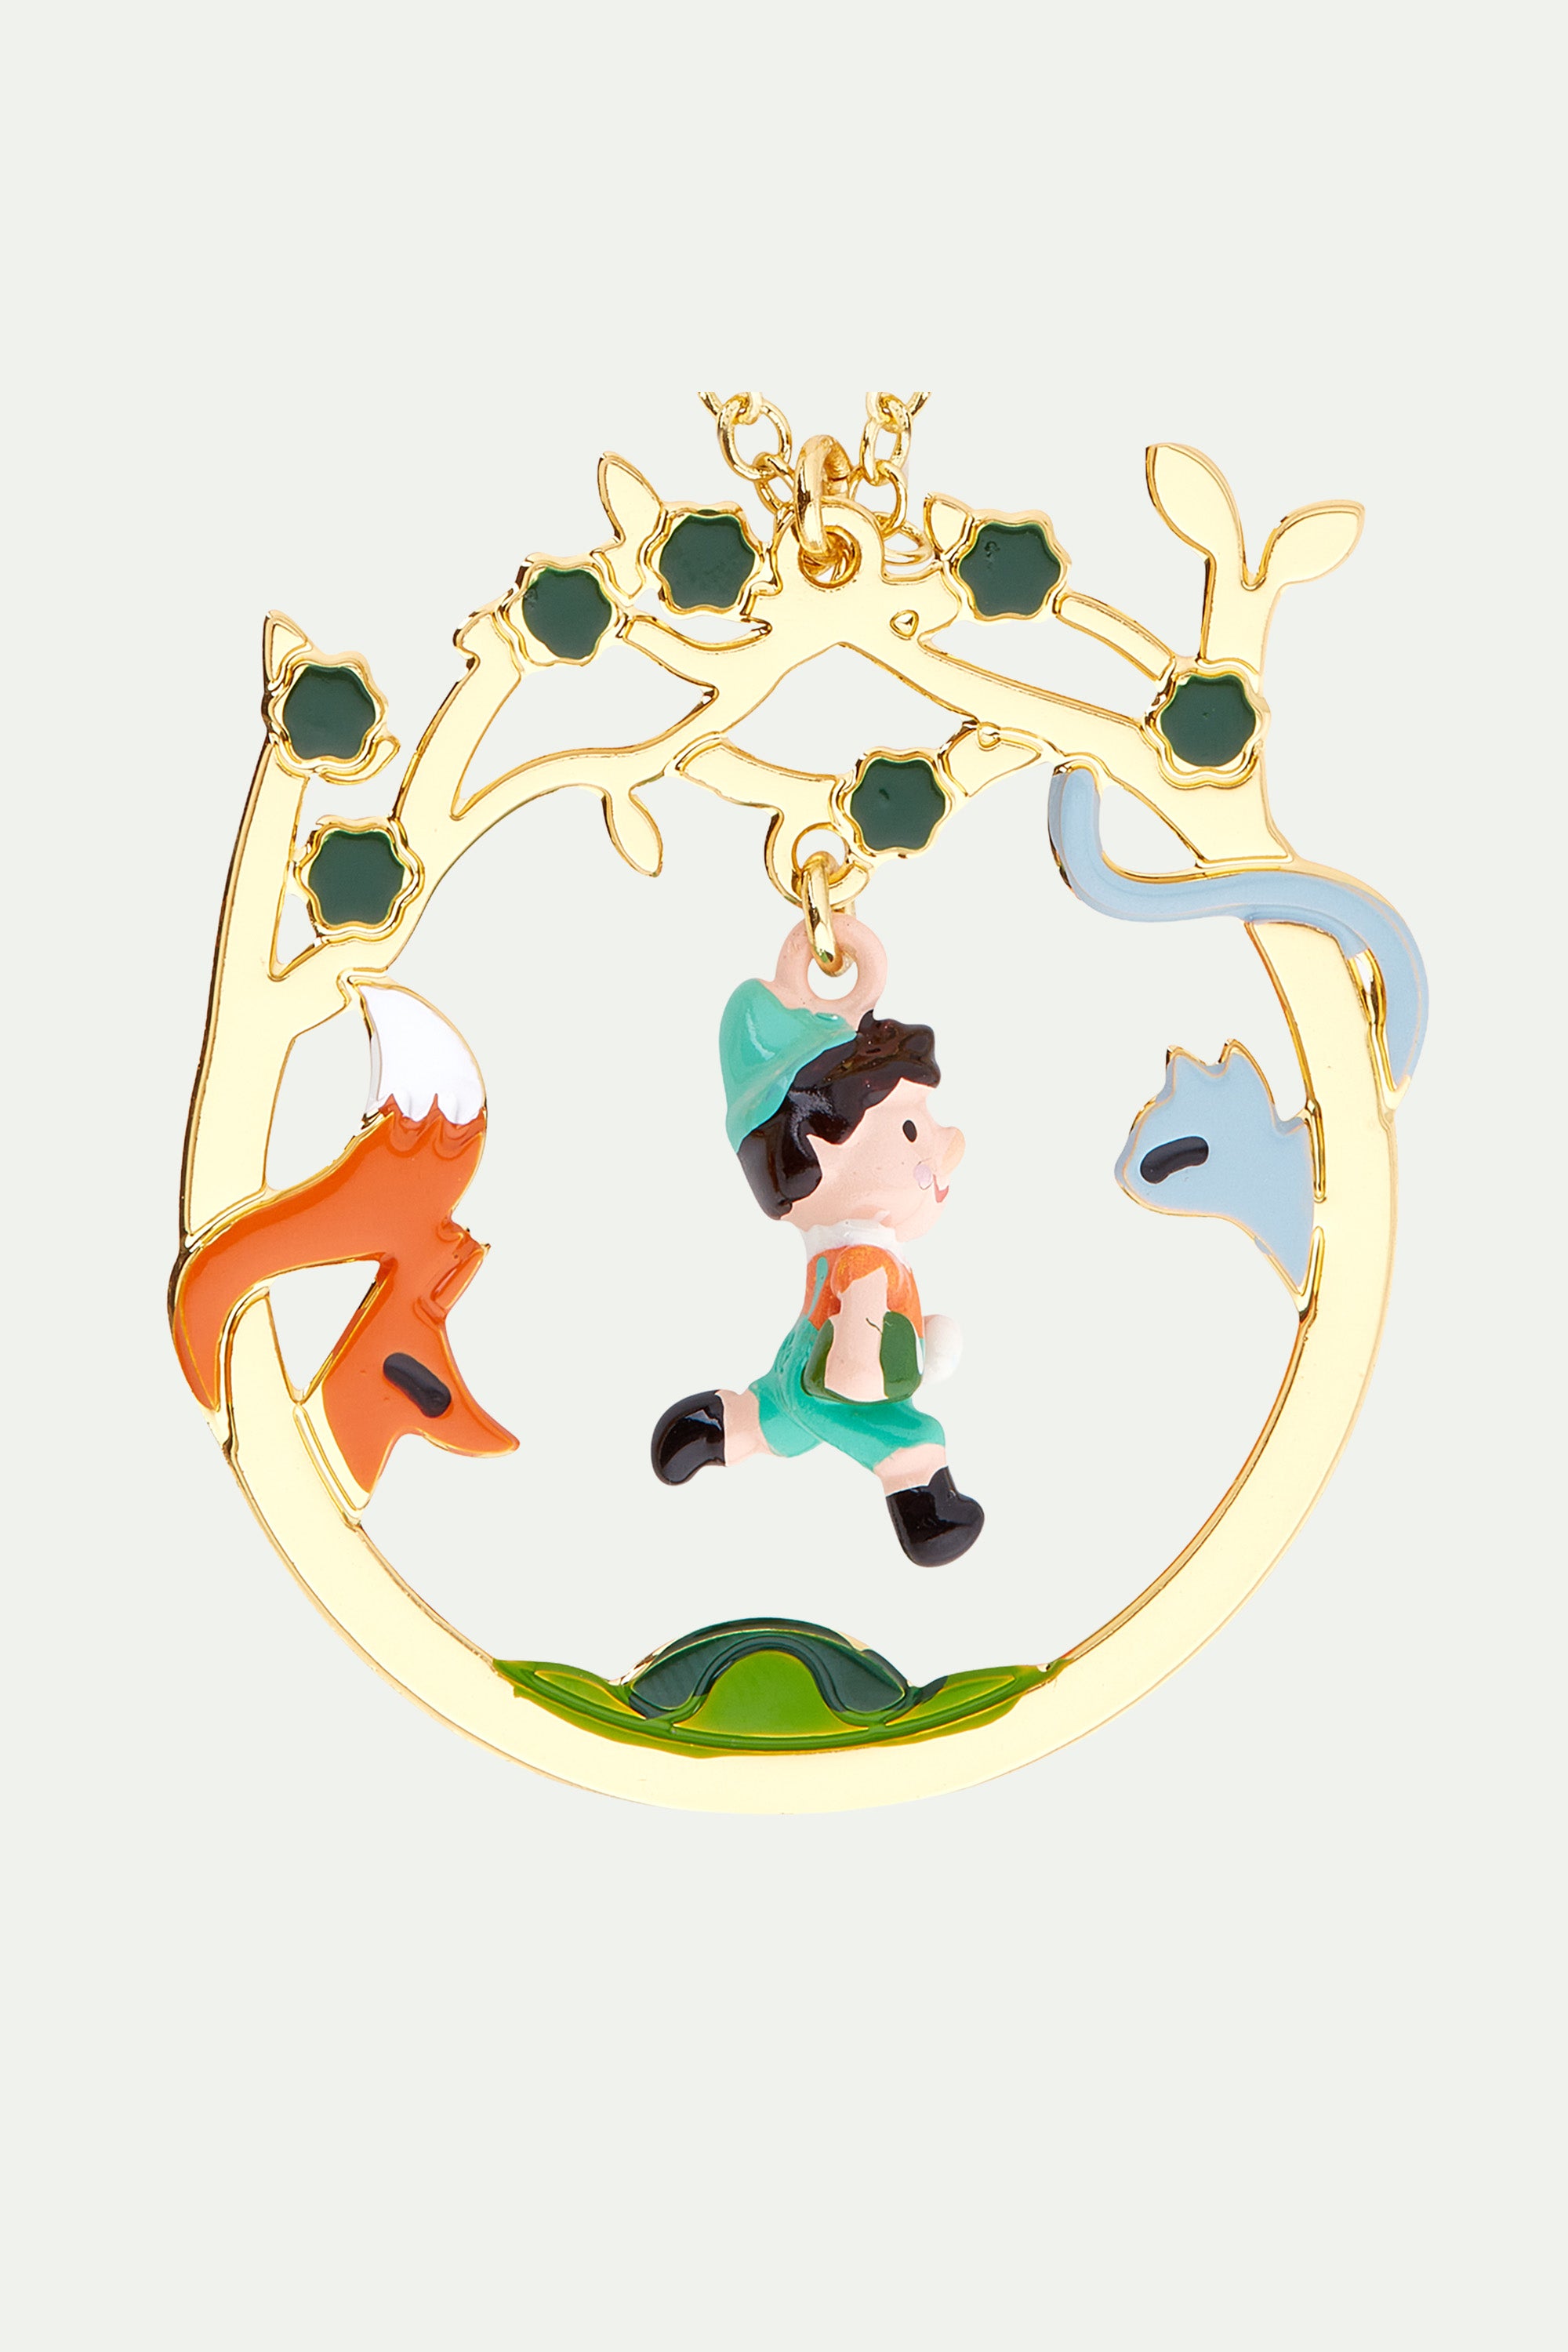 Pinocchio and friends in the forest necklace